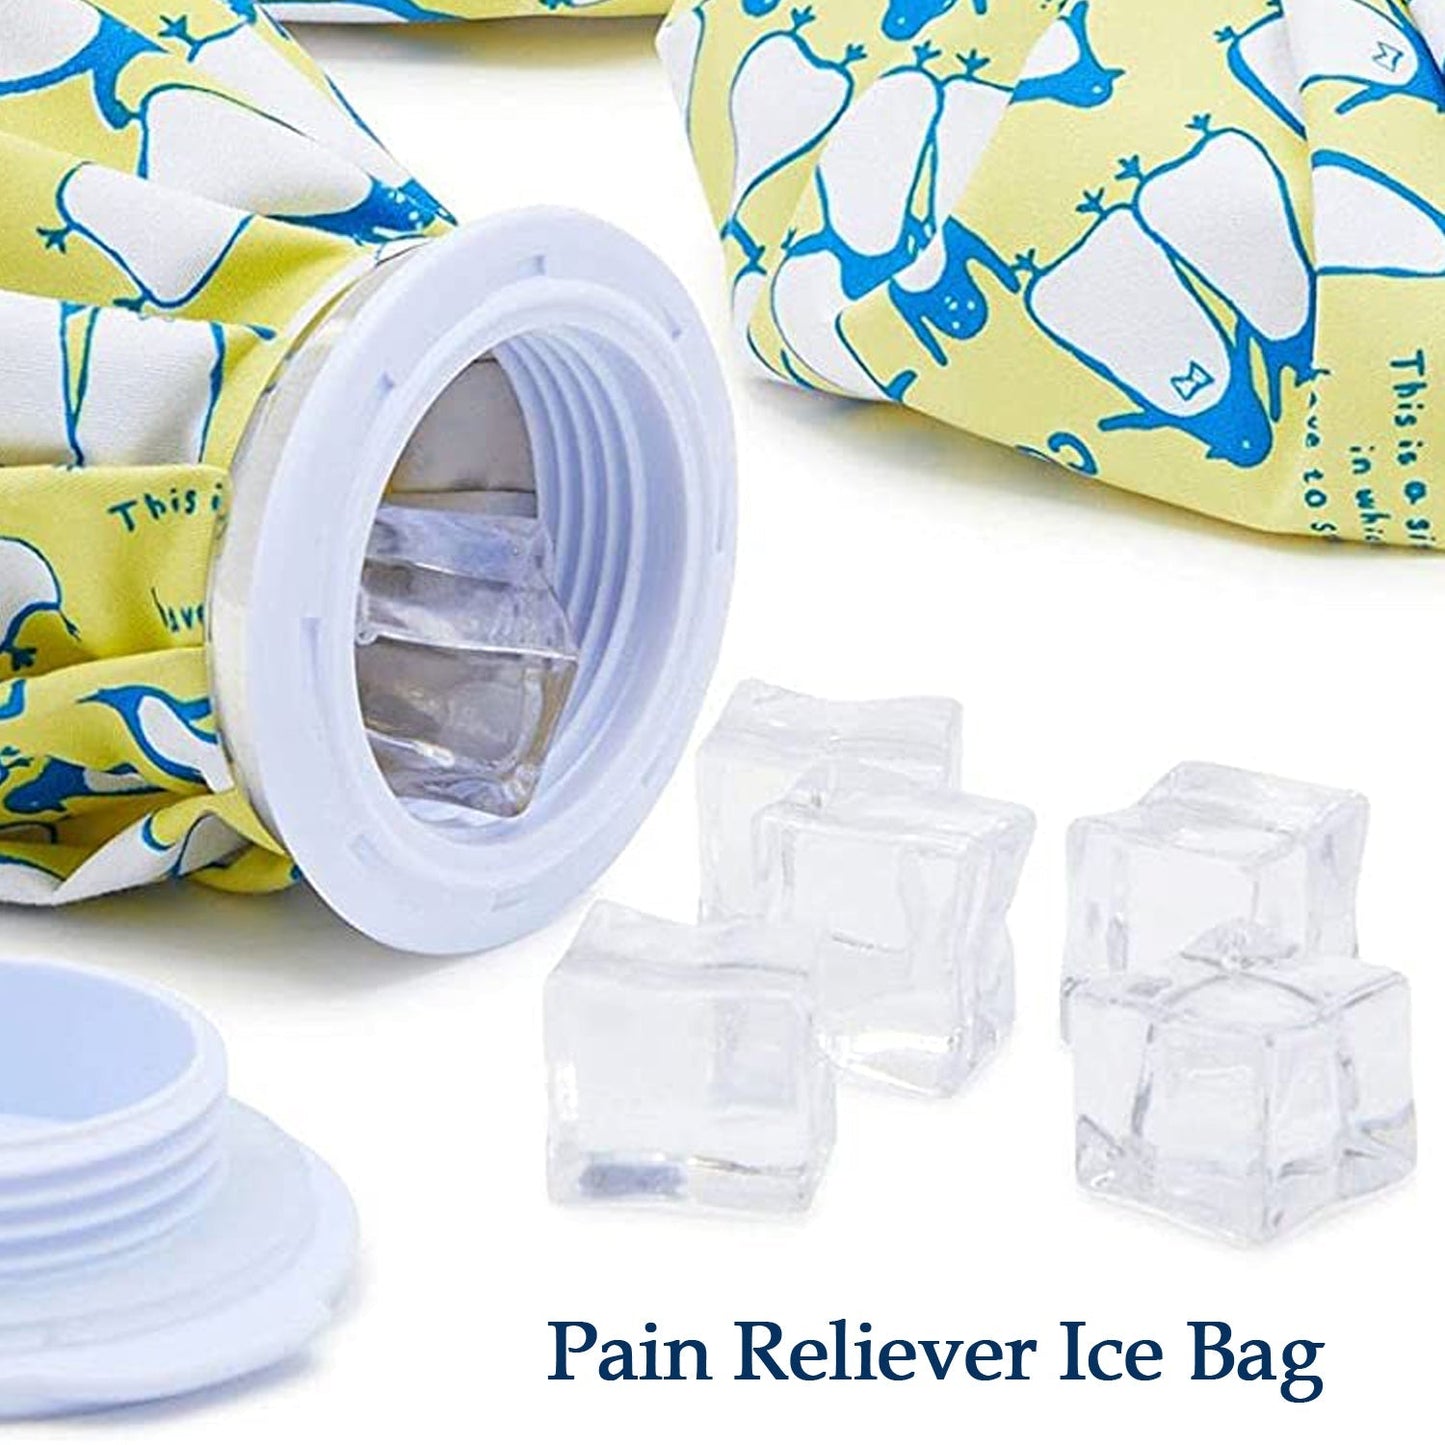 6167 S Pain Reliever Ice Bag Used To Overcome Joints And Muscles Pain In The Body. 